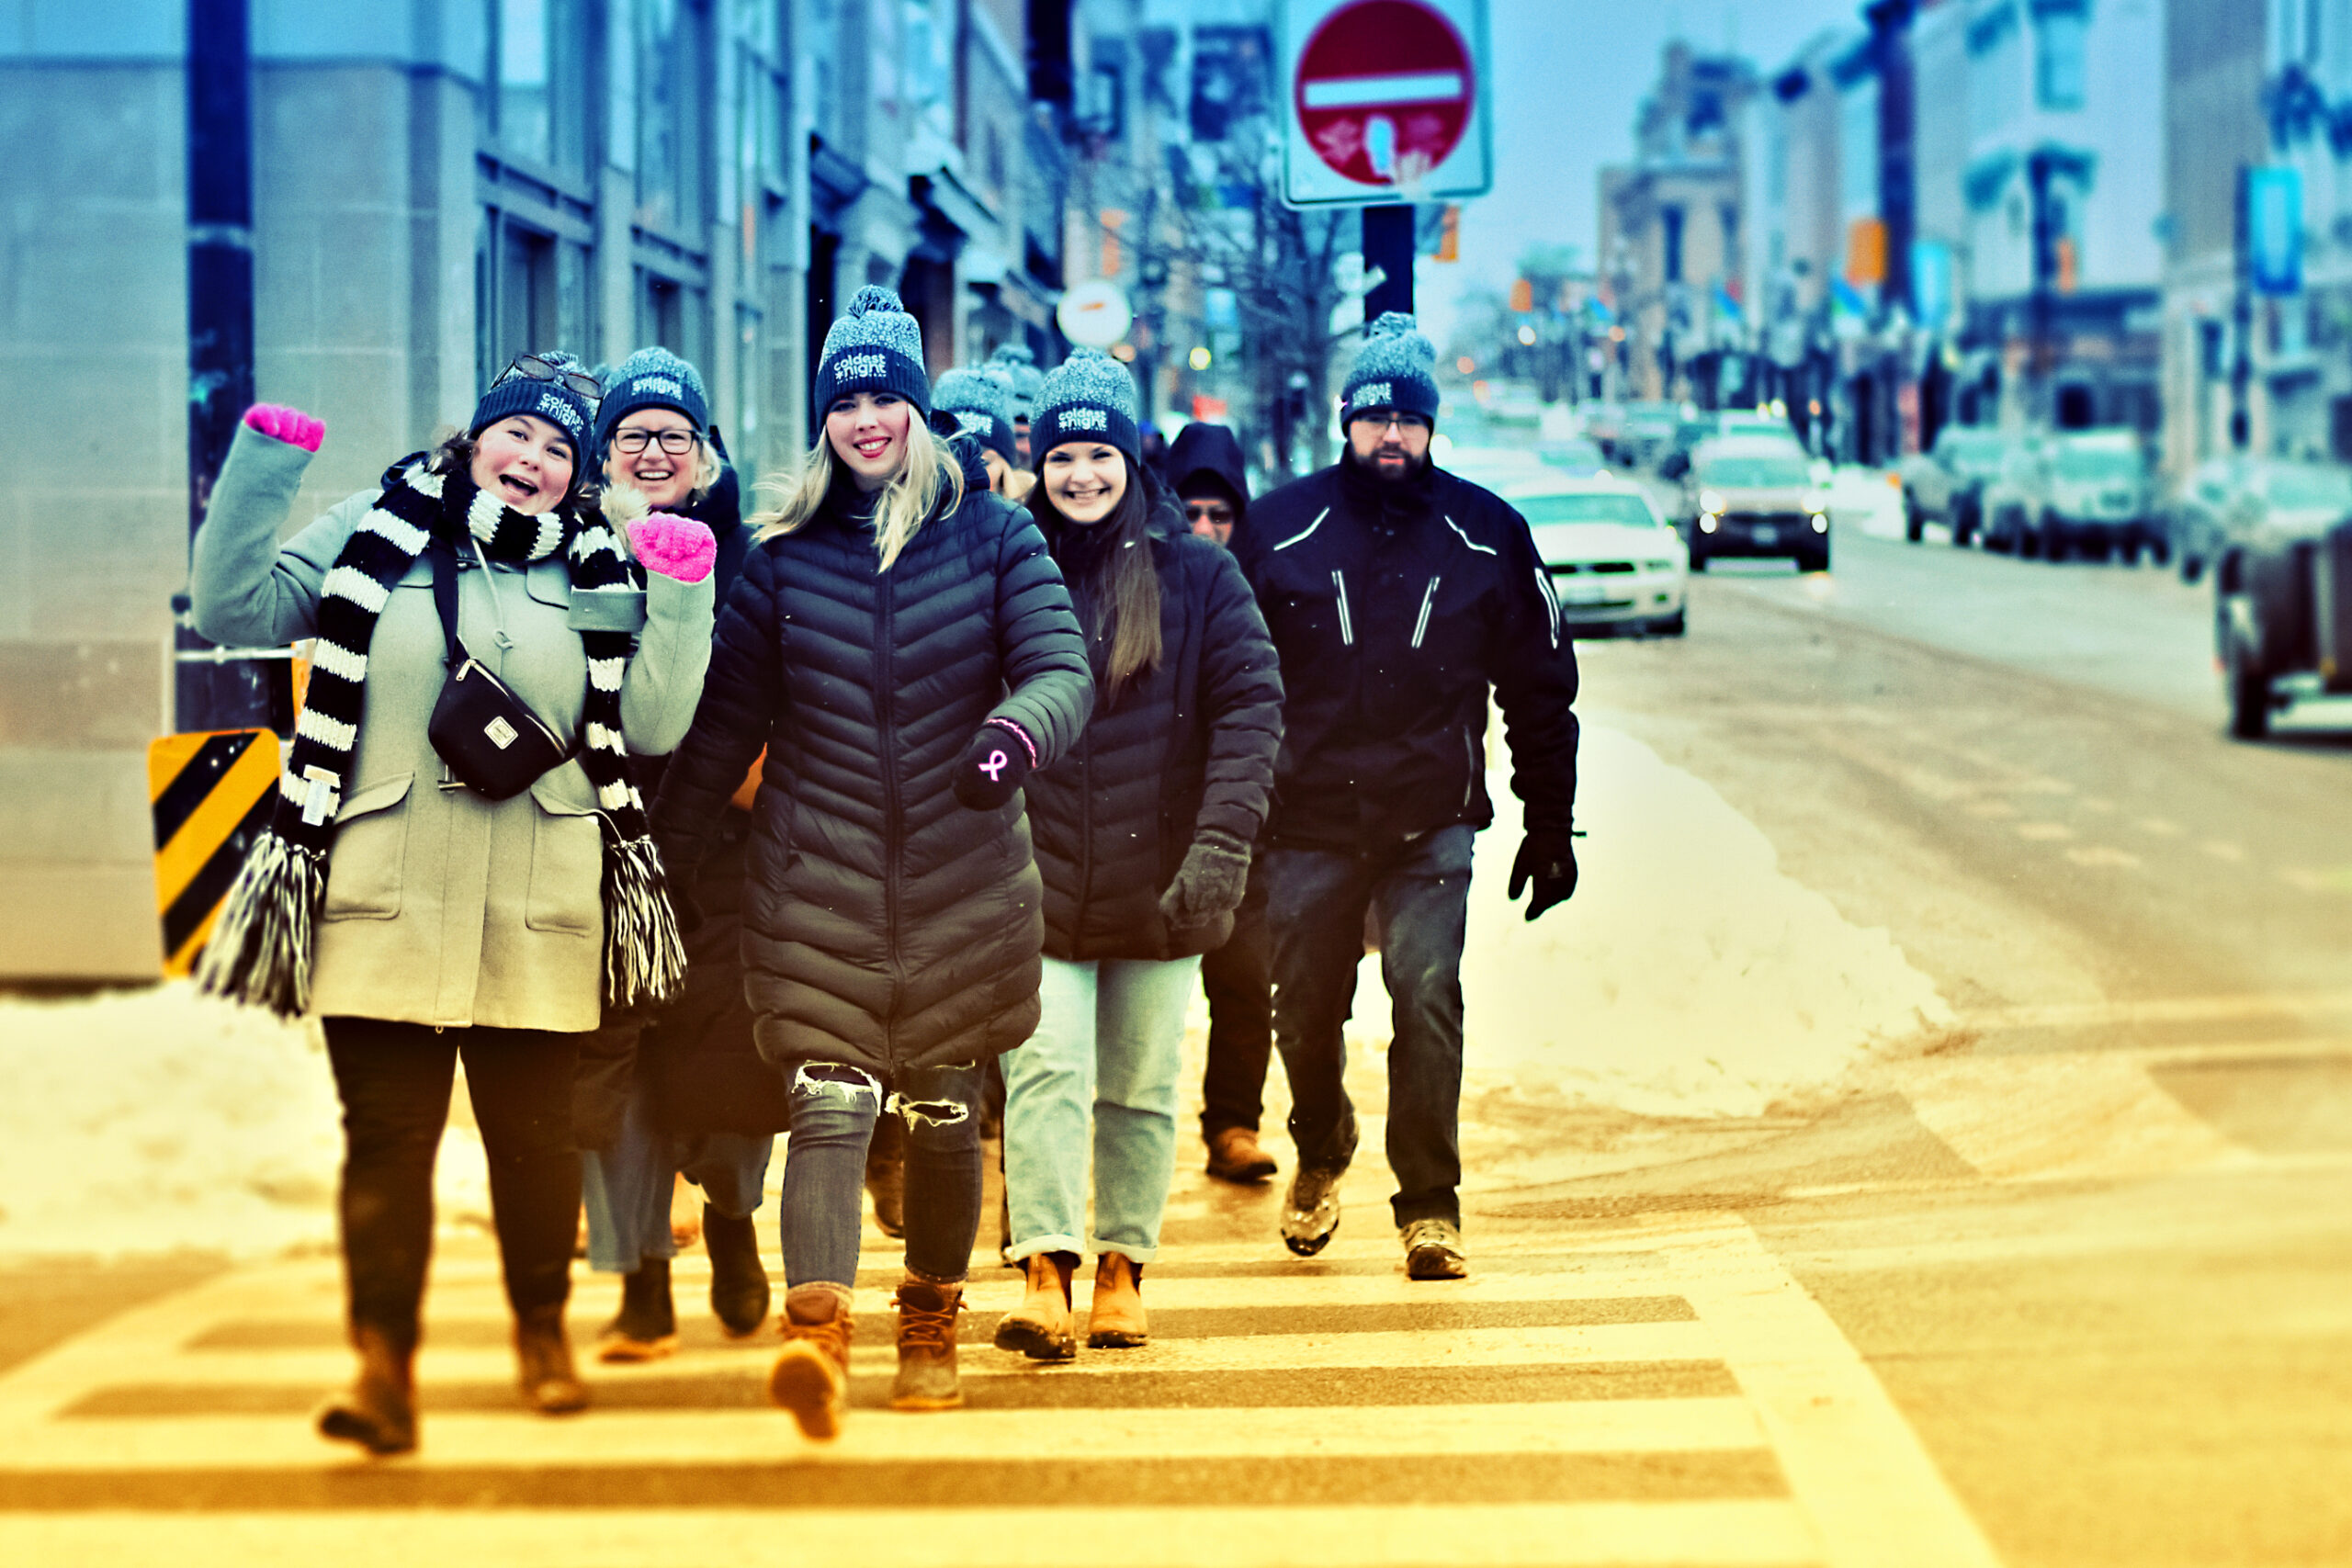 A photo of a group of people walking, crossing the street at a crosswalk. They are happy and waving.